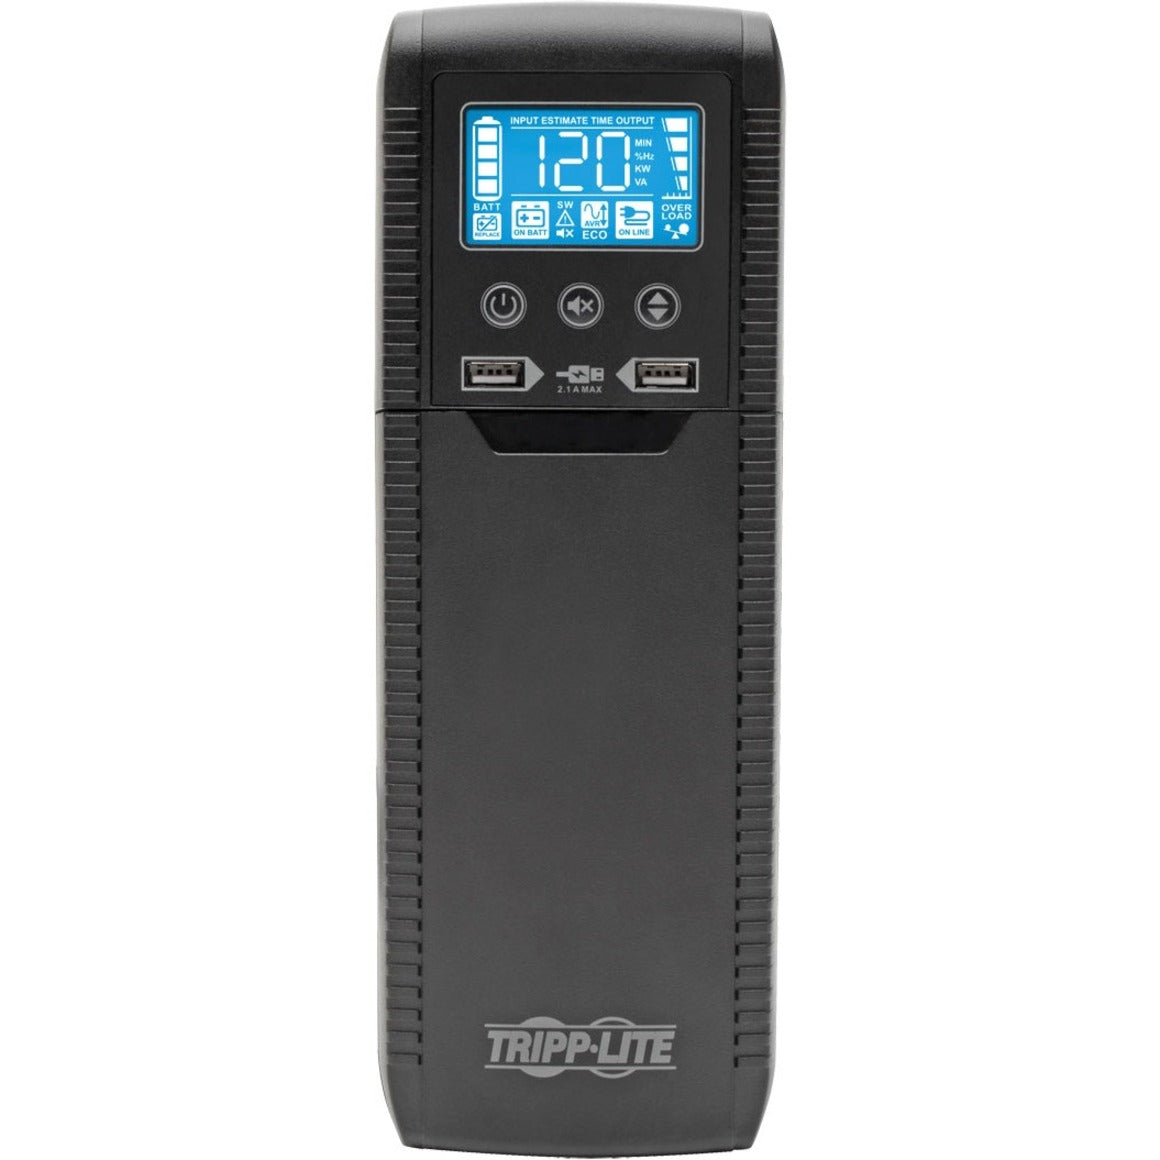 Tripp Lite ECO1300LCD 1300VA Tower UPS, 10 Outlets, Energy Star, USB Port